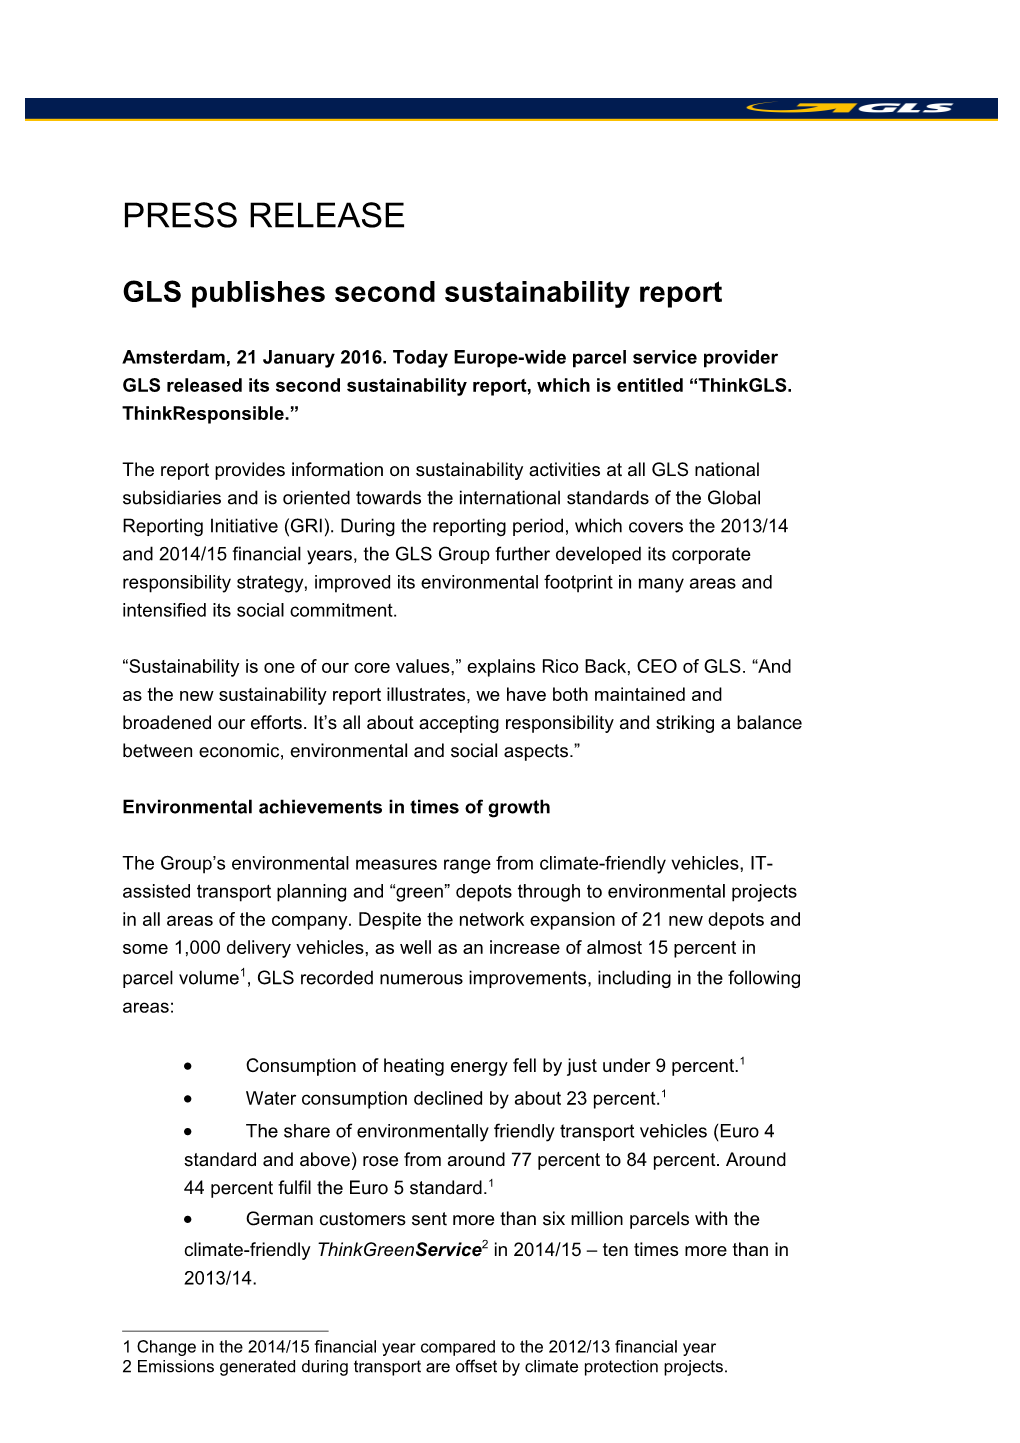 GLS Publishes Second Sustainability Report